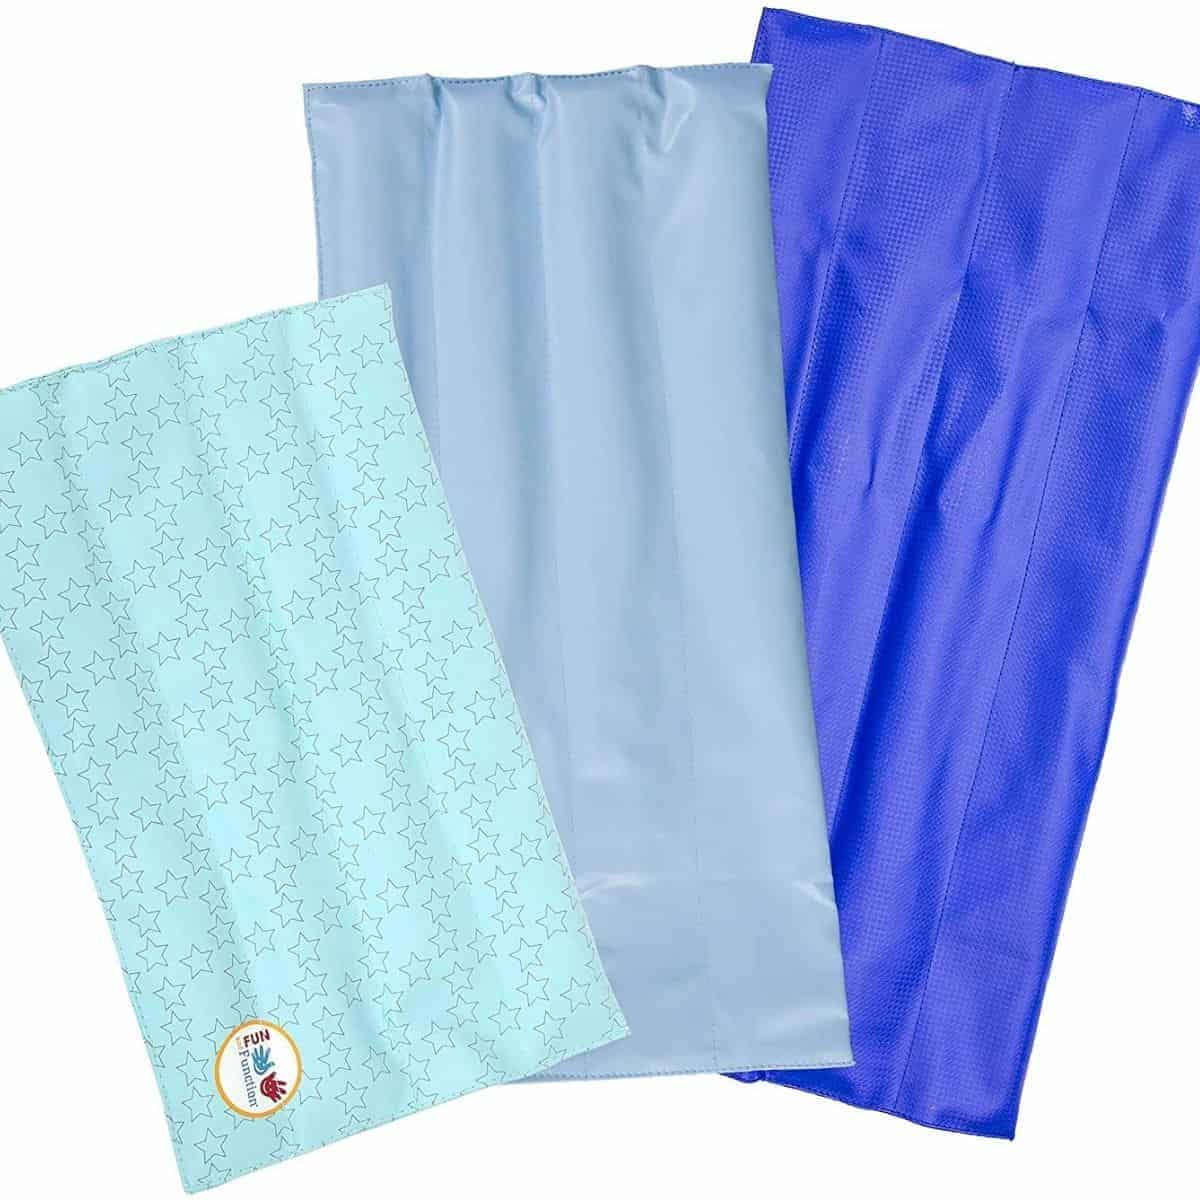 Check out this amazing weighted lap pad guide to help improve attention, focus, or calming from an occupational therapist, whether your child has autism, sensory processing disorder, or no diagnosis at all! 